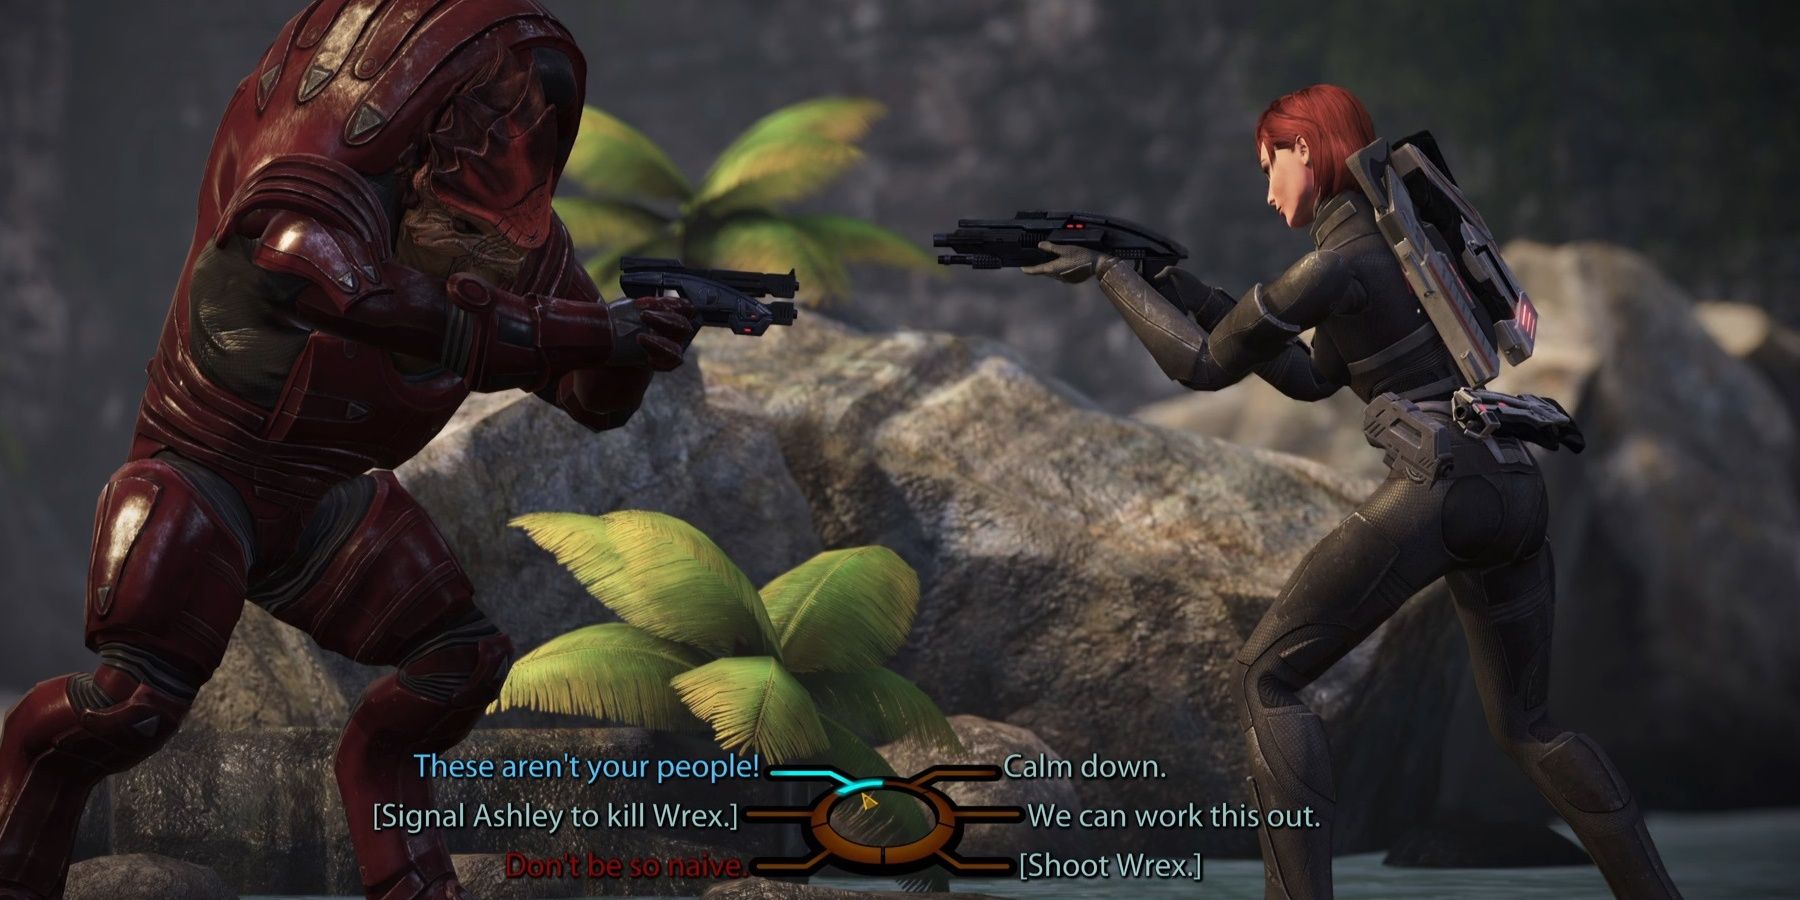 Killing Wrex in Mass Effect 1: Legendary Edition has lasting effects that costs the best ending